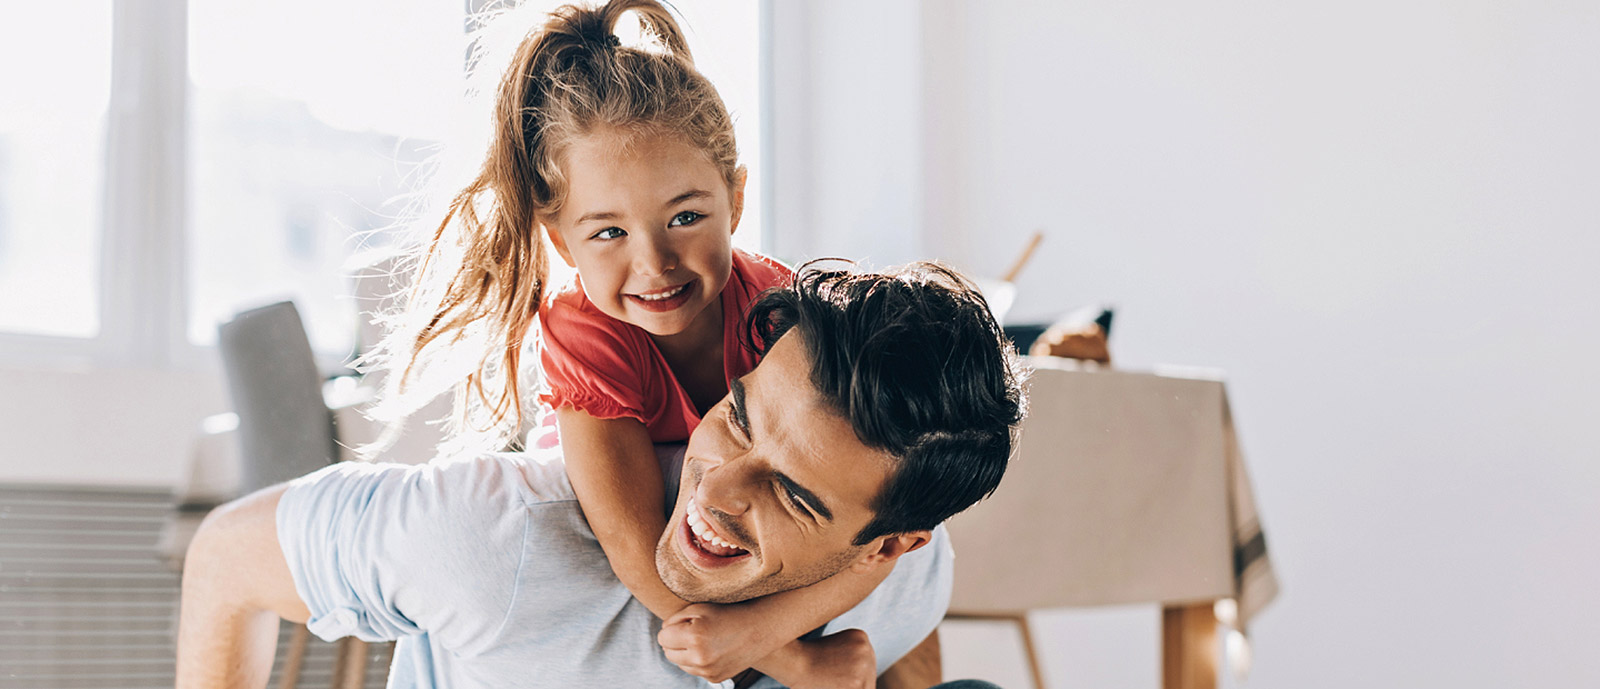 Man playing with daughter in living room